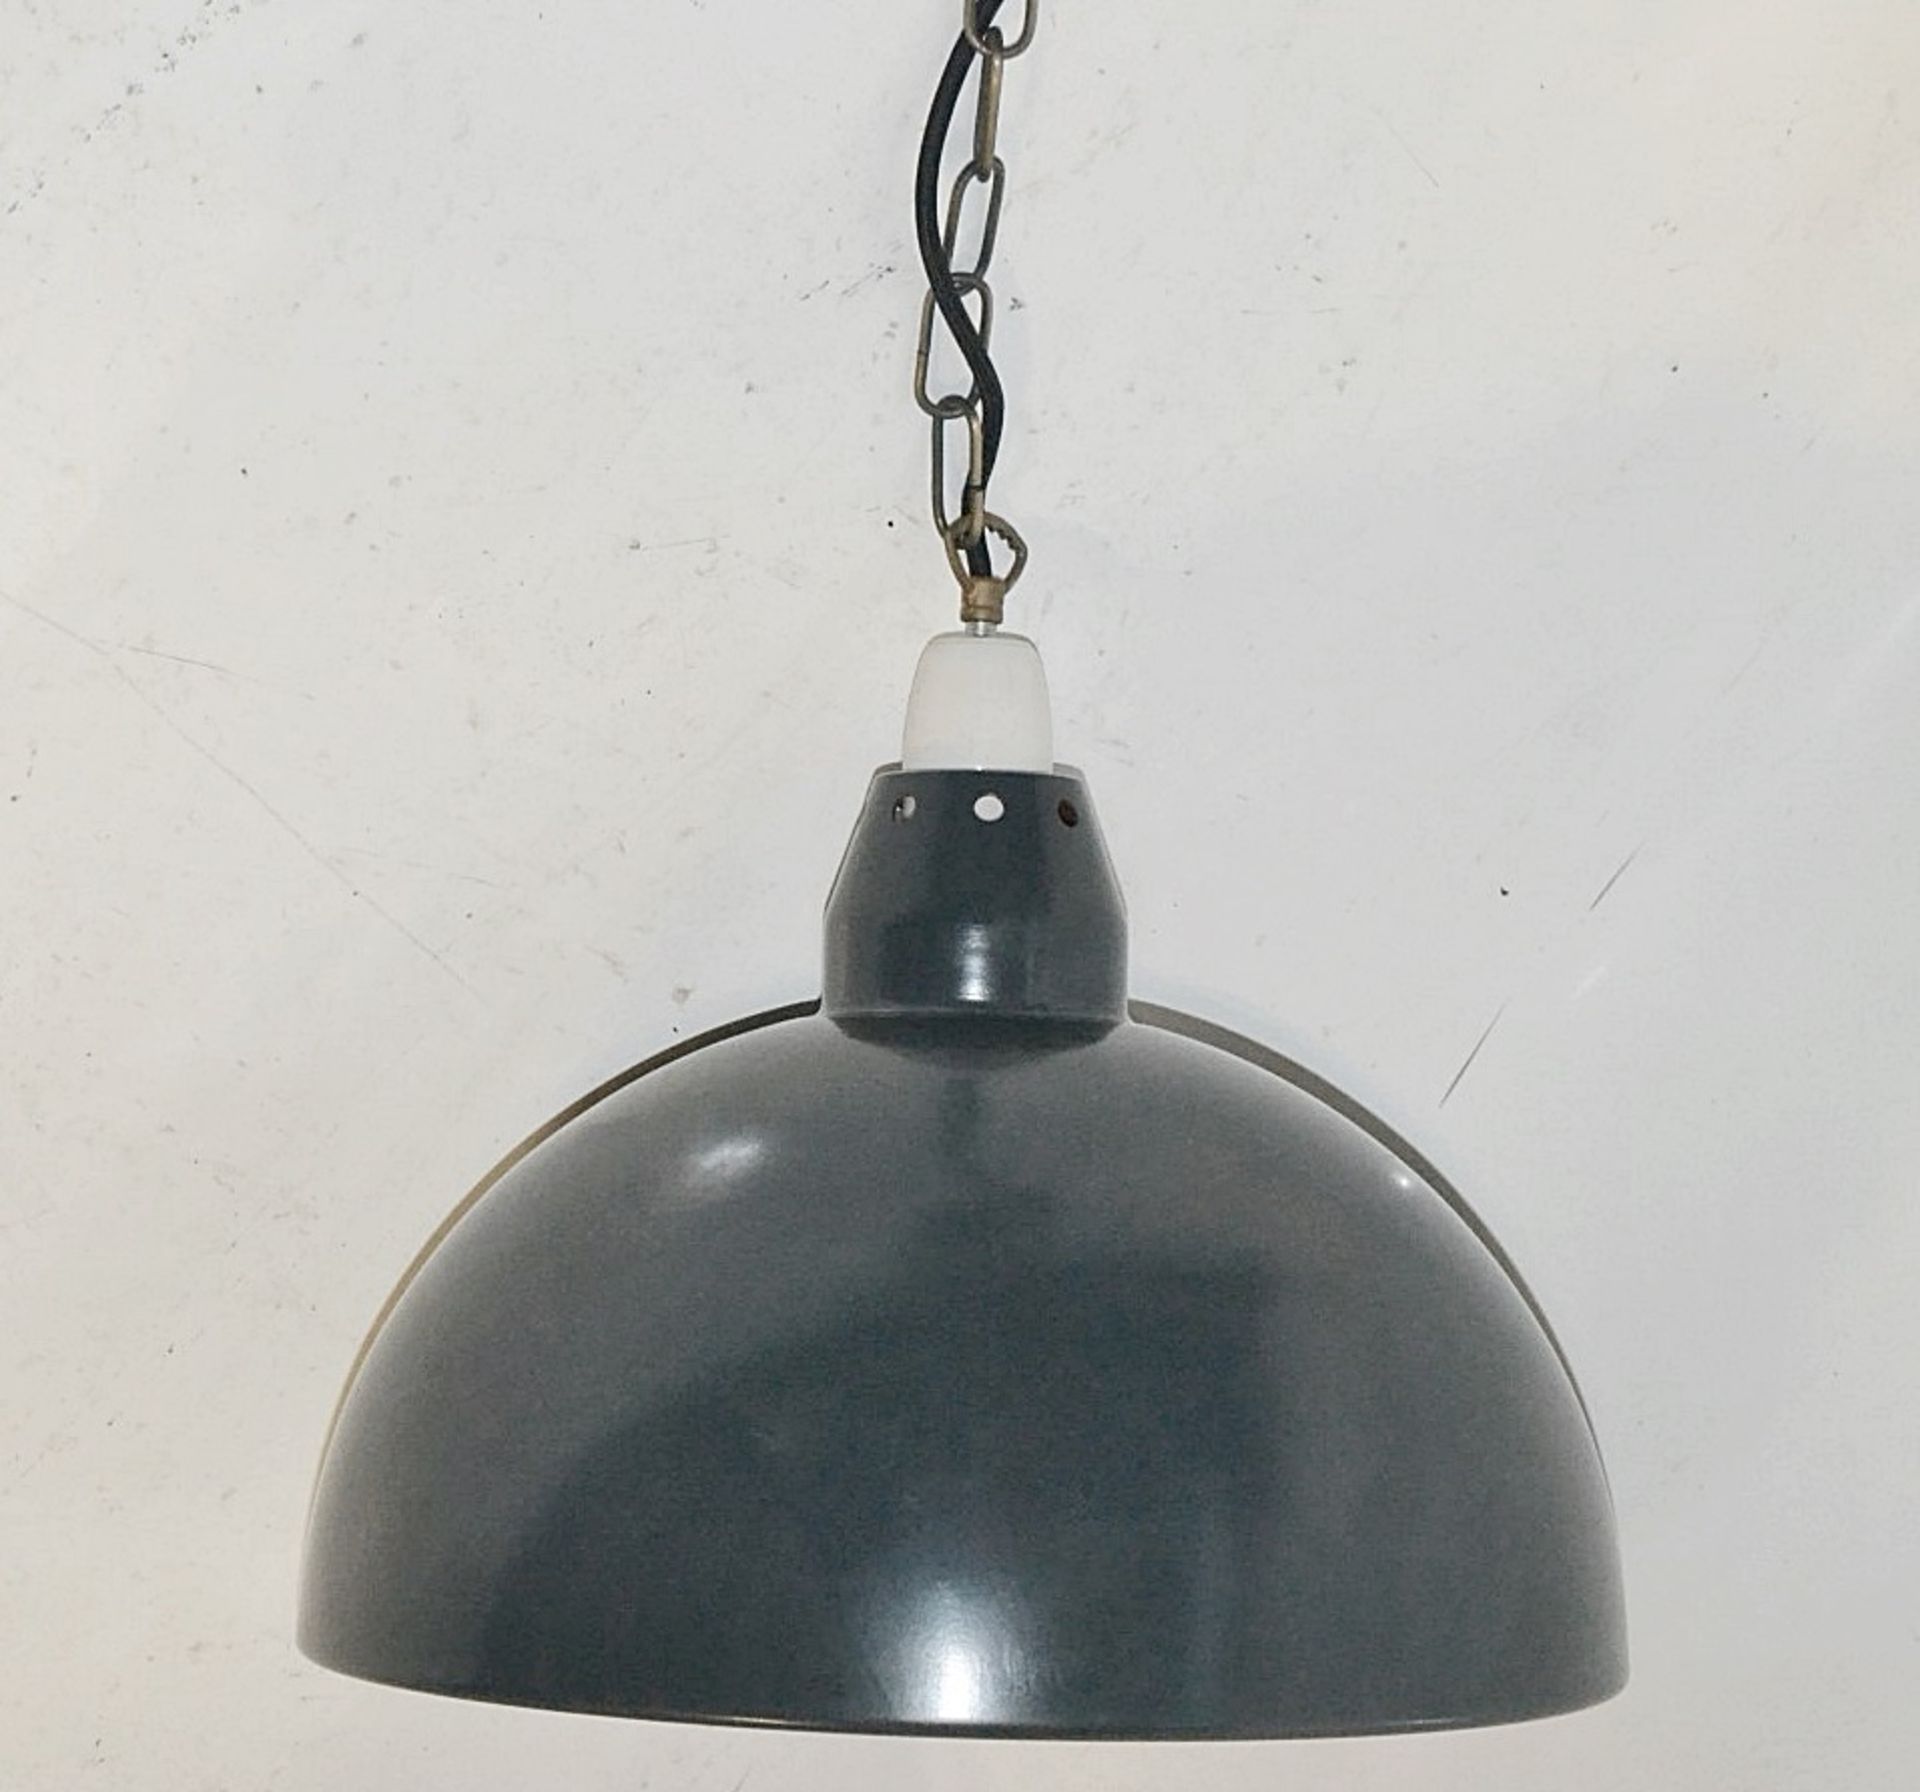 2 x Dome Pendant Ceiling Light Fittings With Chain And Black Fabric Flex - CL353 - Image 6 of 6